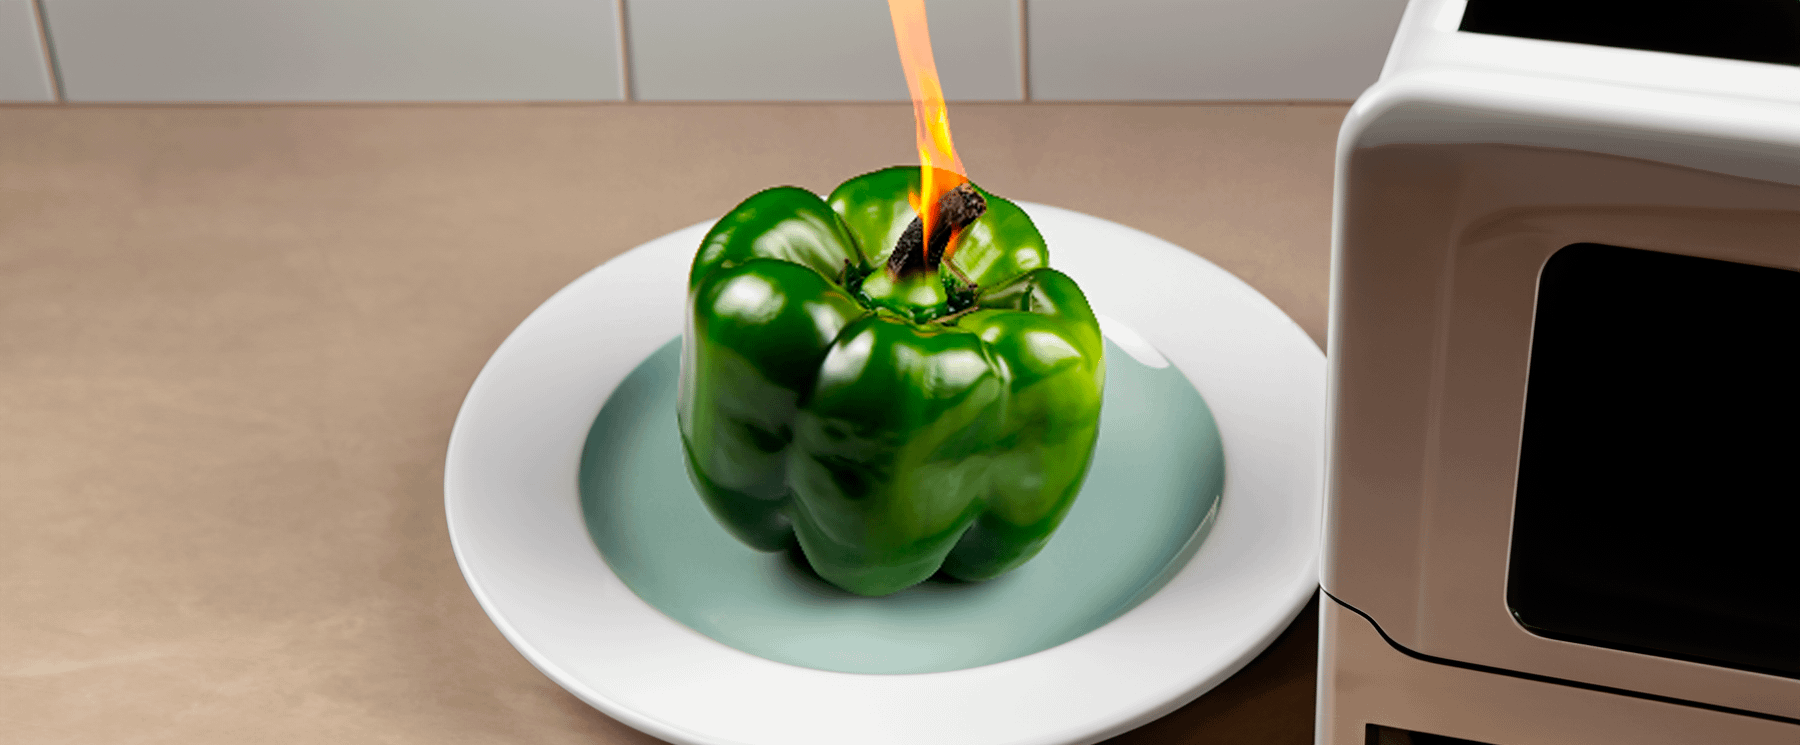 Green bell pepper with stem on fire